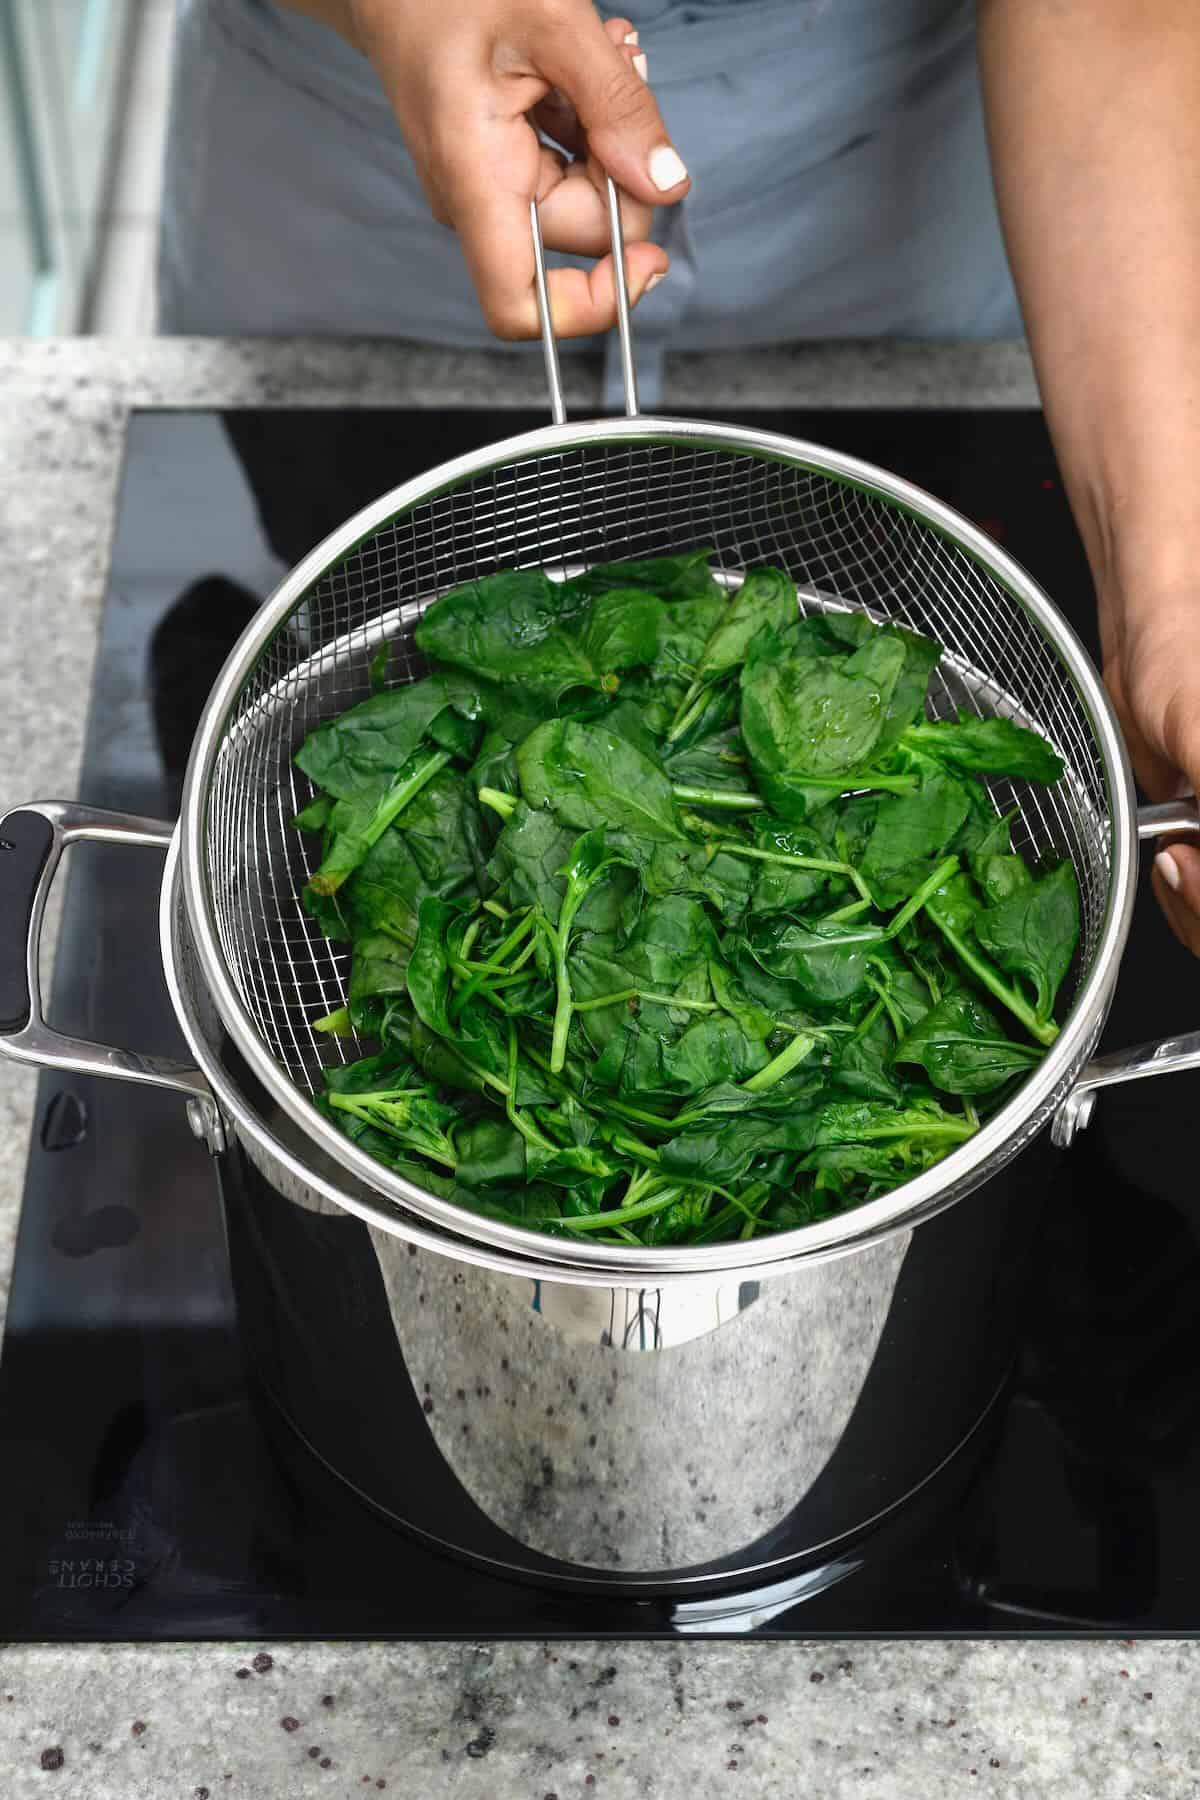 Steaming spinach